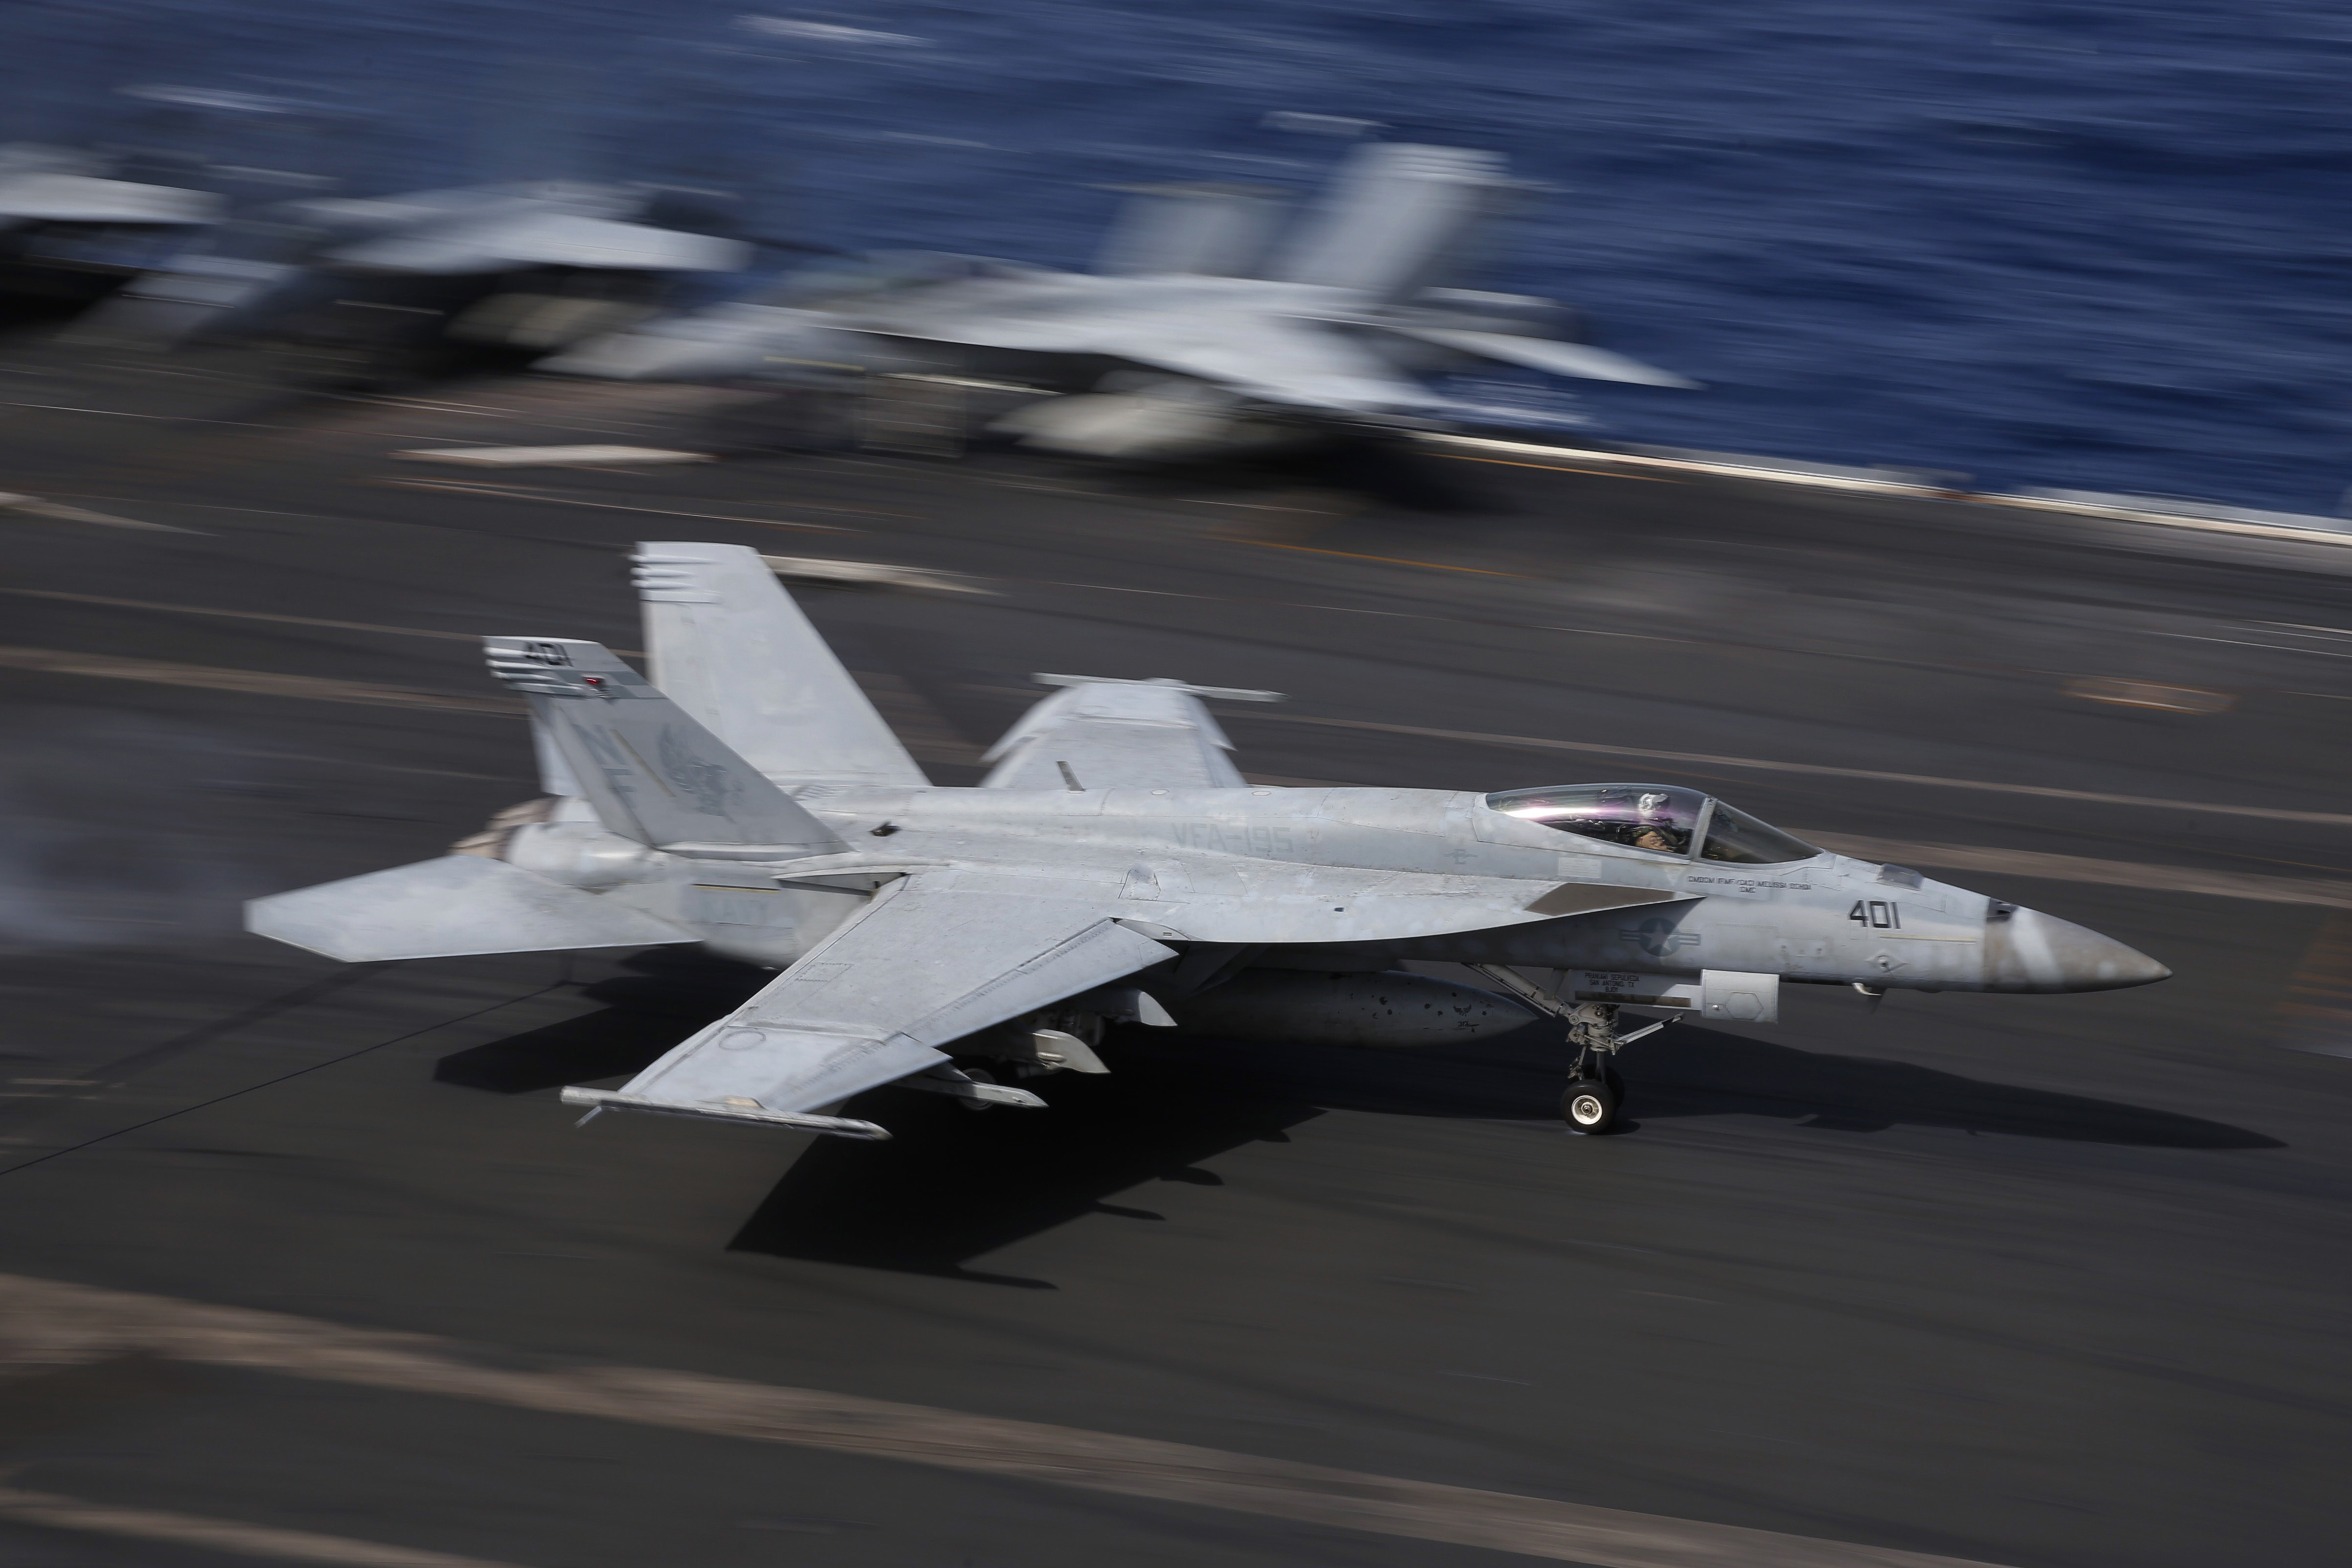 An F/A-18 Super Hornet fighter jet lands on the deck of the U.S. Navy USS Ronald Reagan in the South China Sea, Tuesday, Nov. 20, 2018. China is allowing a U.S. Navy aircraft carrier and its battle group to make a port call in Hong Kong after it turned down similar request amid tensions with Washington.  (AP Photo/Kin Cheung)